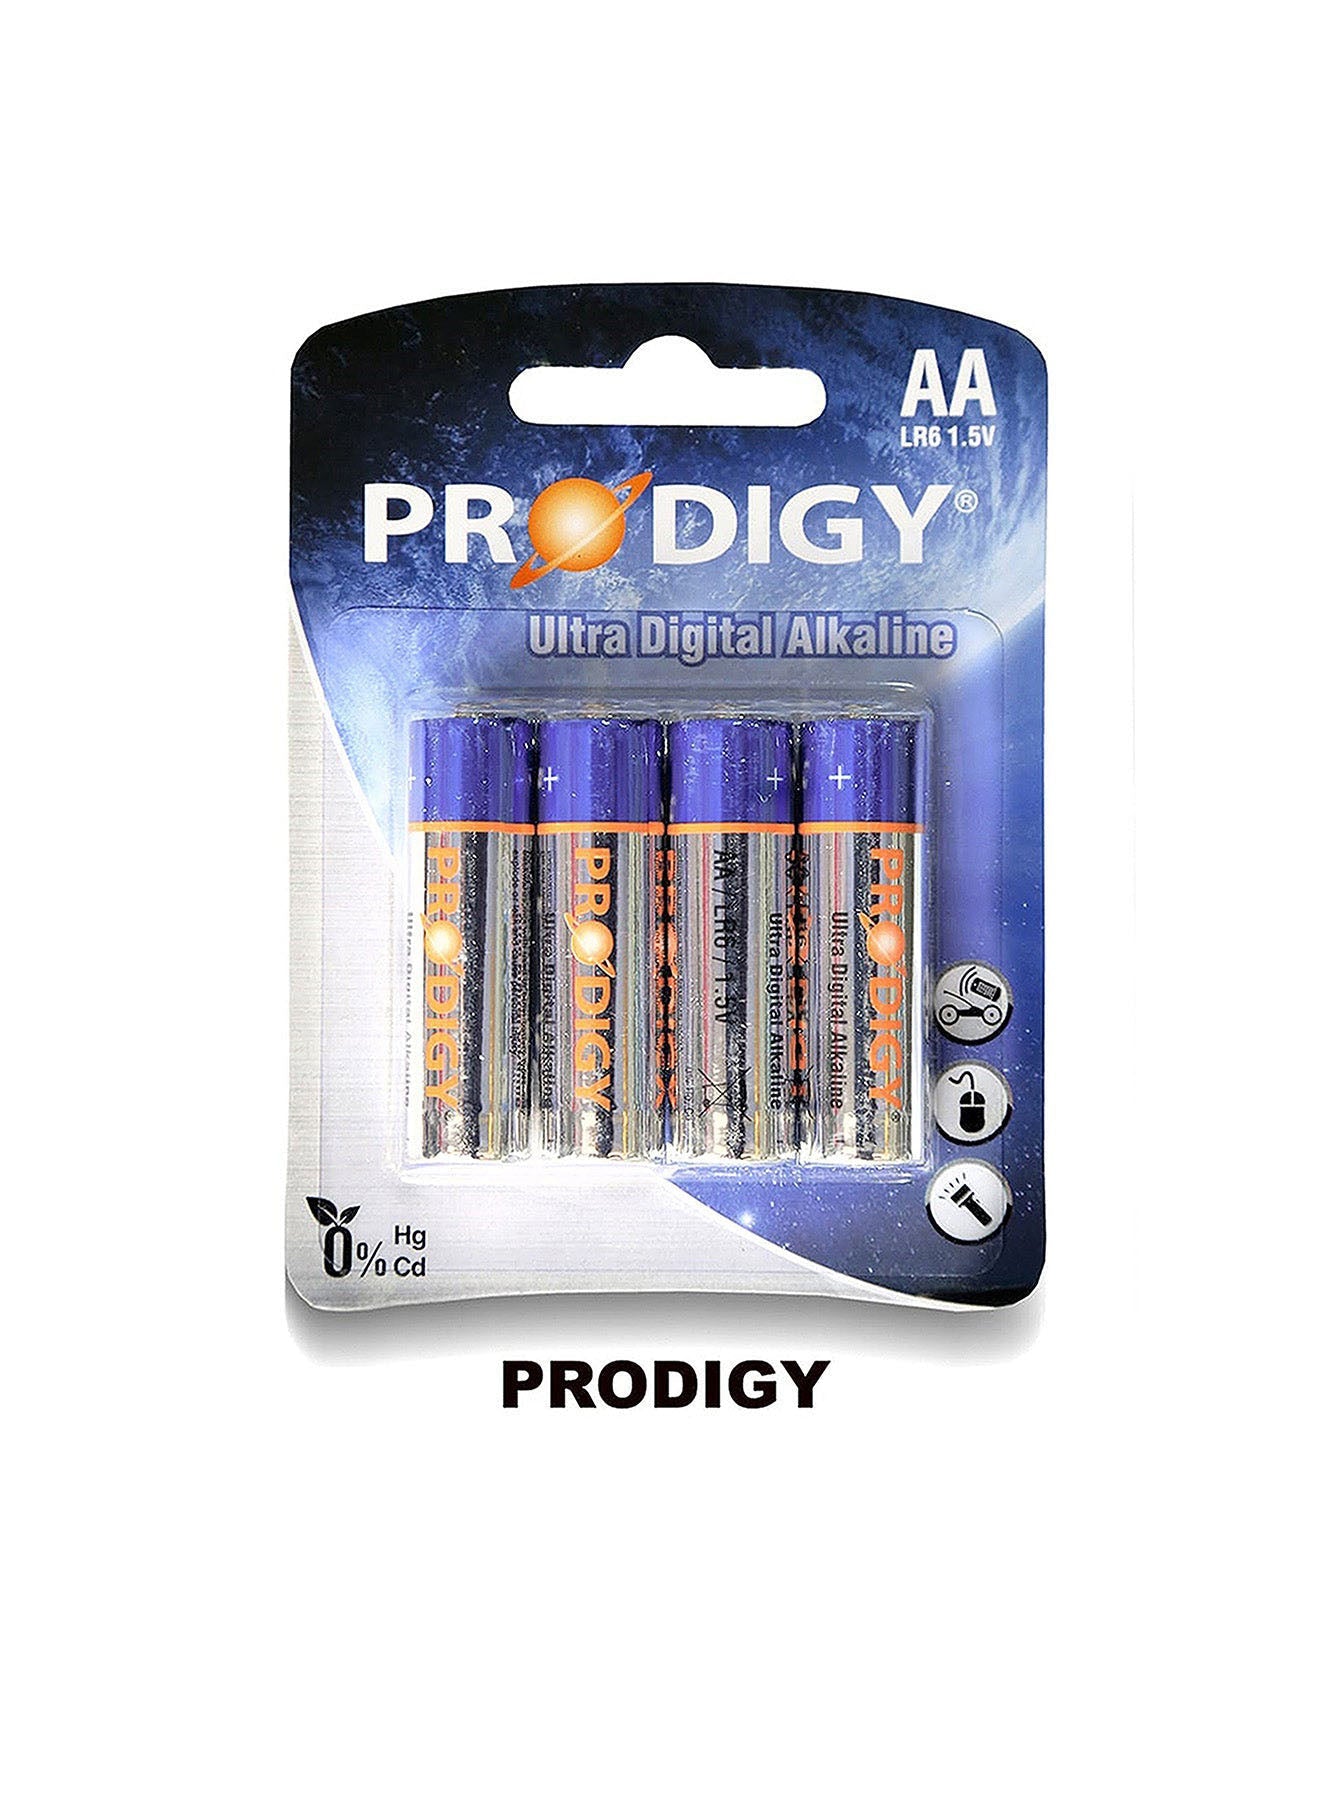 Prodigy Alkaline LR6UD AA4 Value Pack of 2 